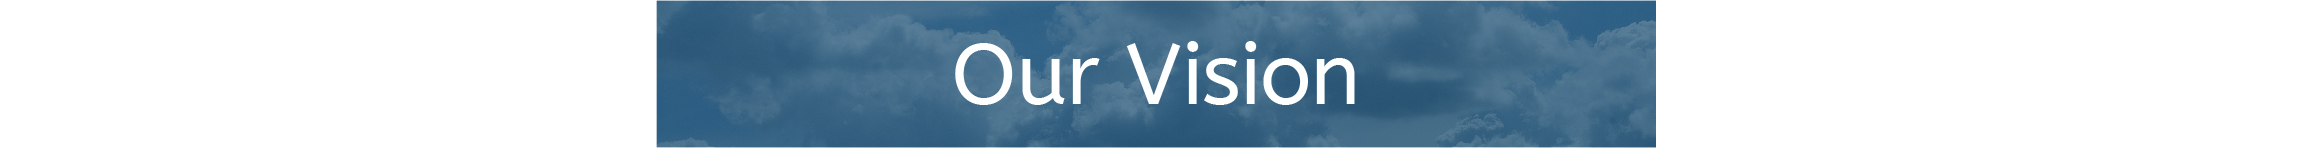 our vision on a cloud background